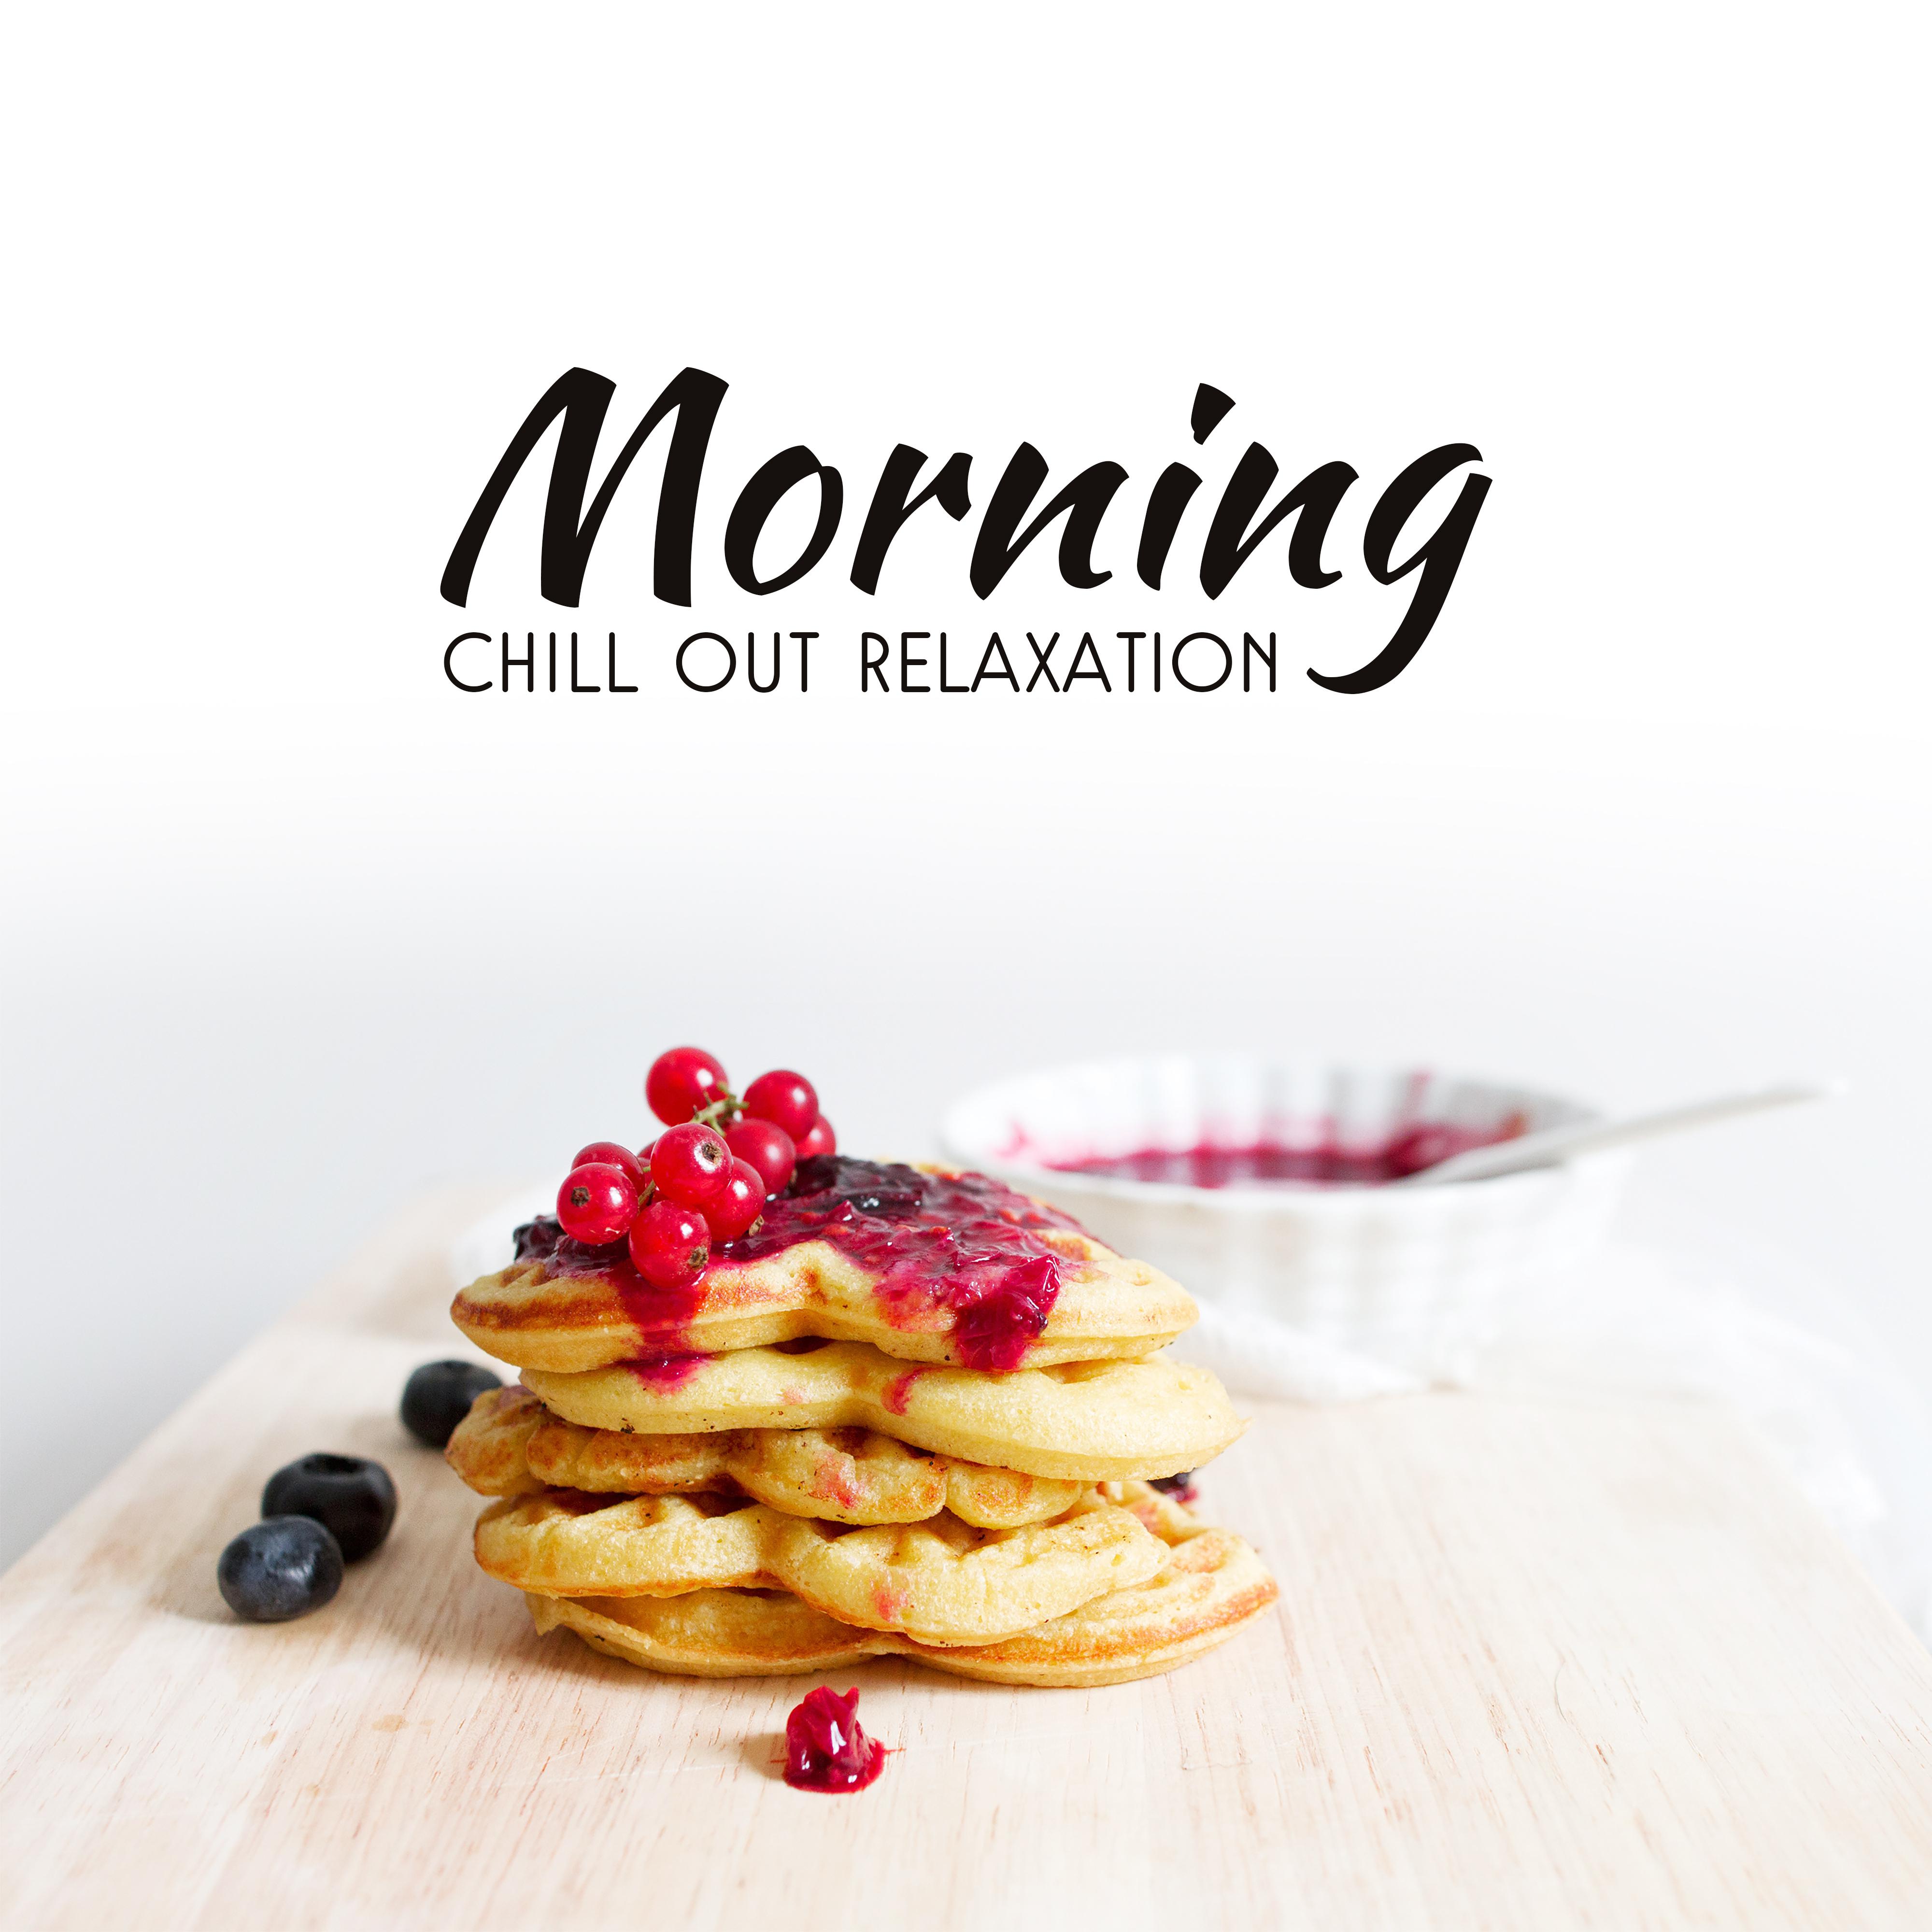 Morning Chill Out Relaxation